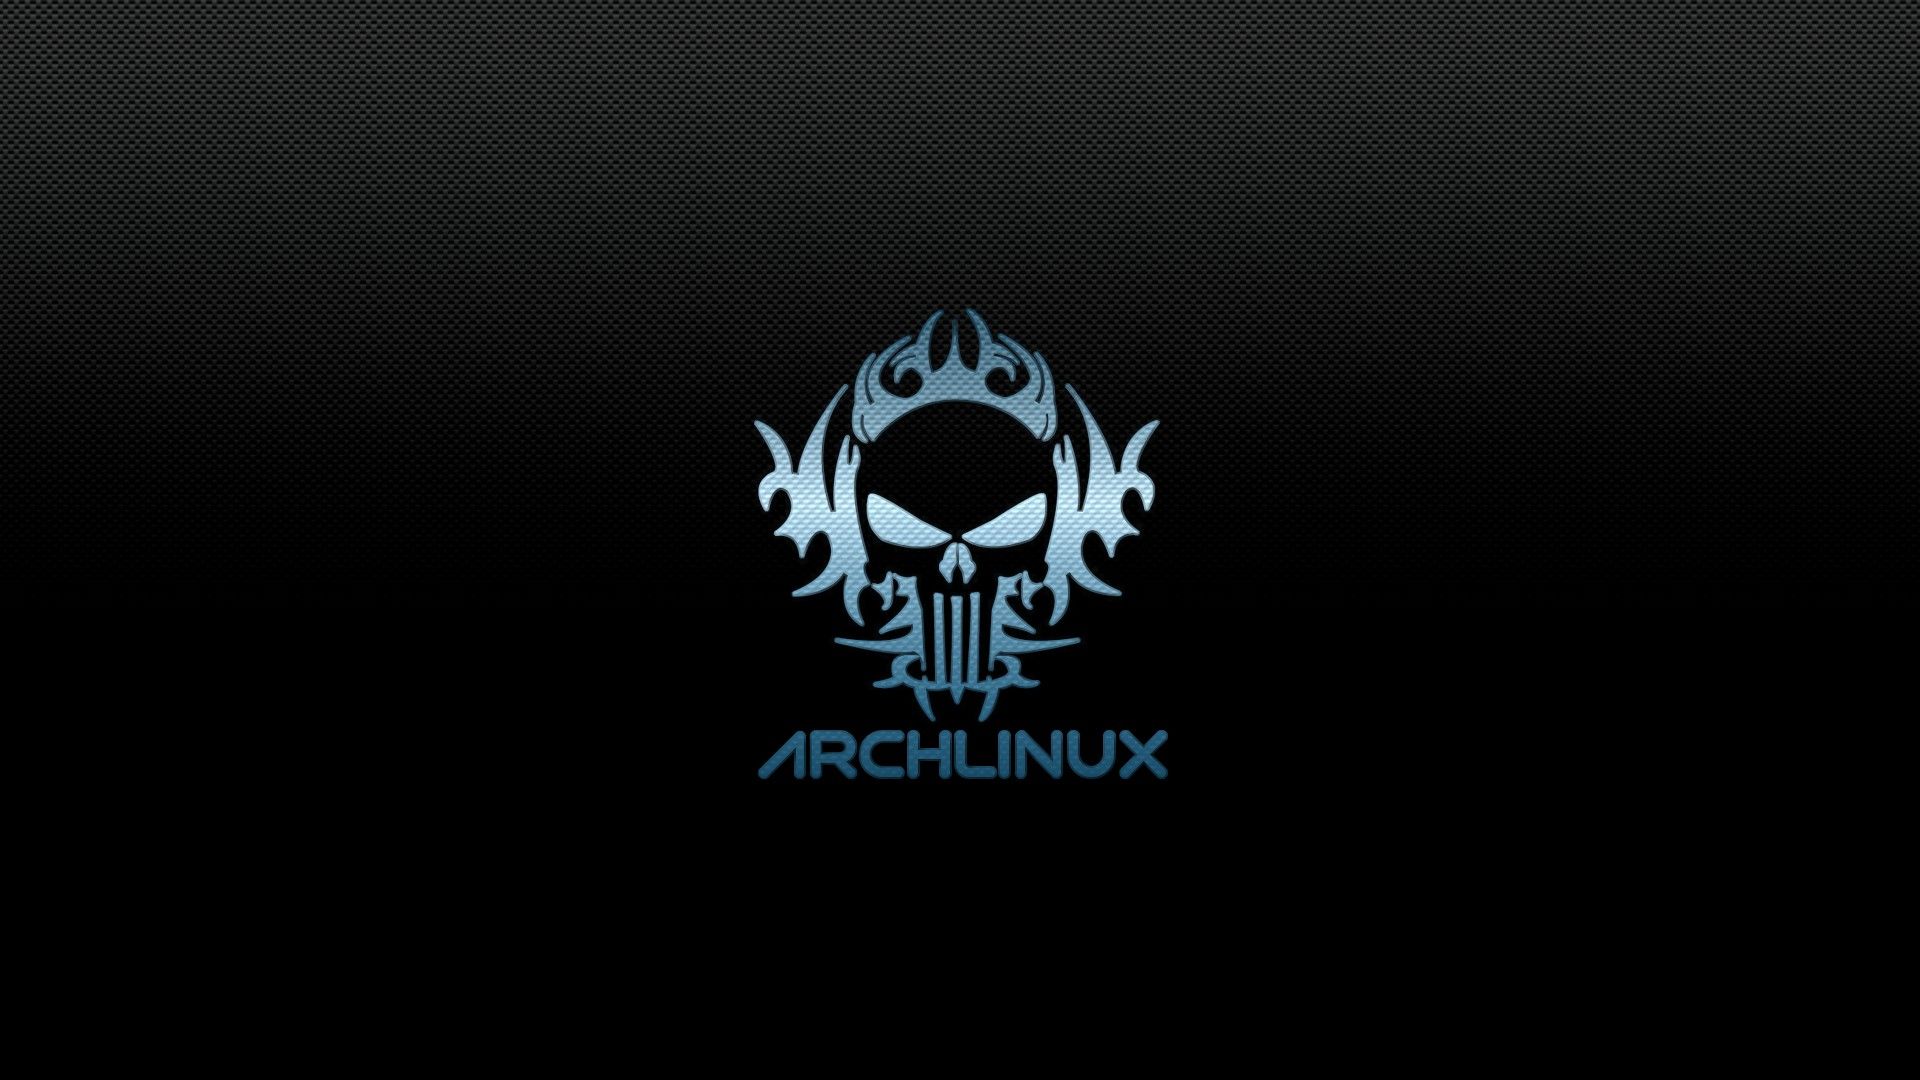 Arch Linux Black OS Wallpaper Free Download Wallpaper High resolution